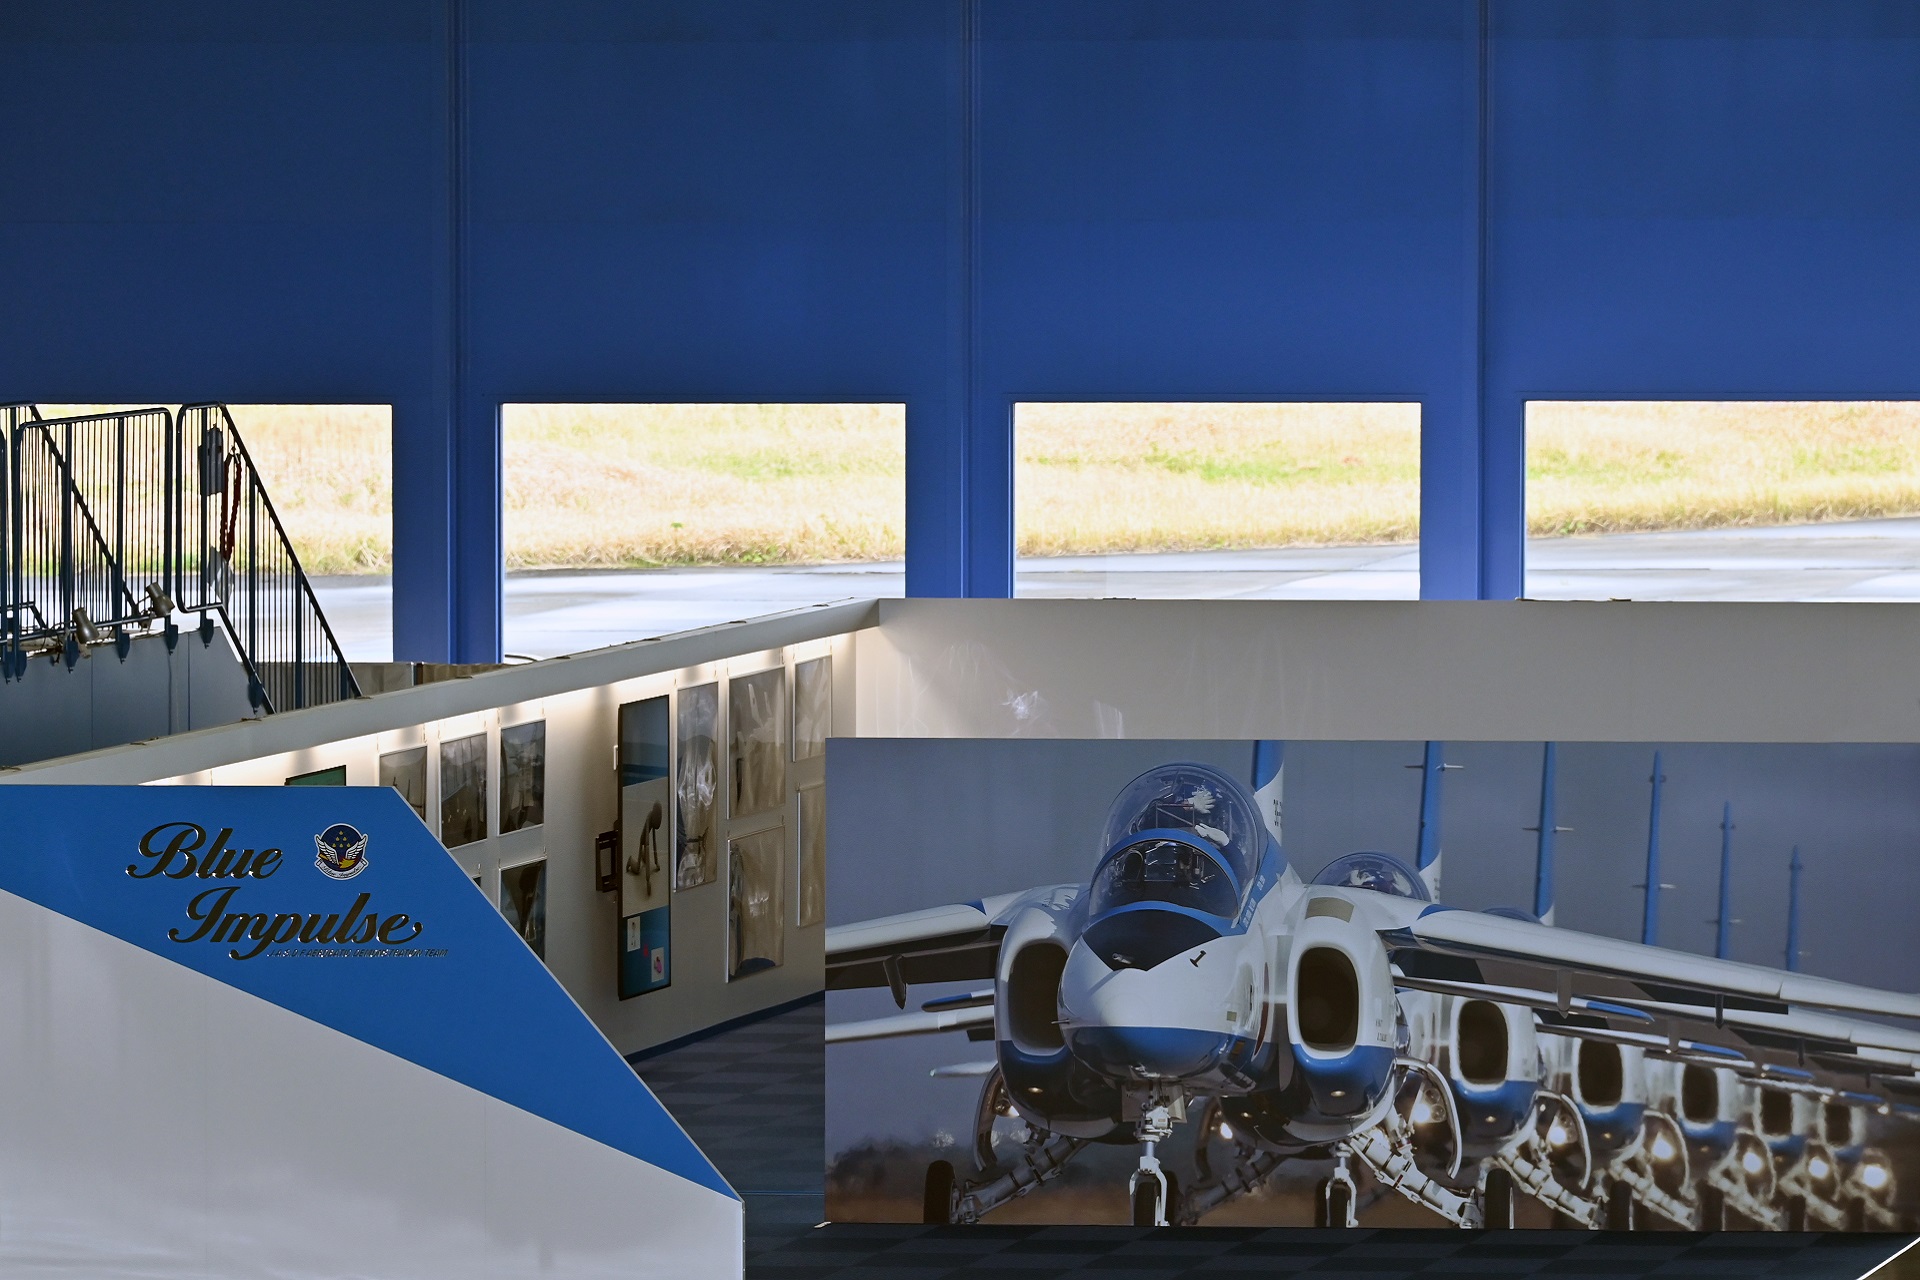 Air Park (Hamamatsu Air Self-Defense Force Public Relations Hall) Experience the Thrill of the Blue Impulse Exhibition